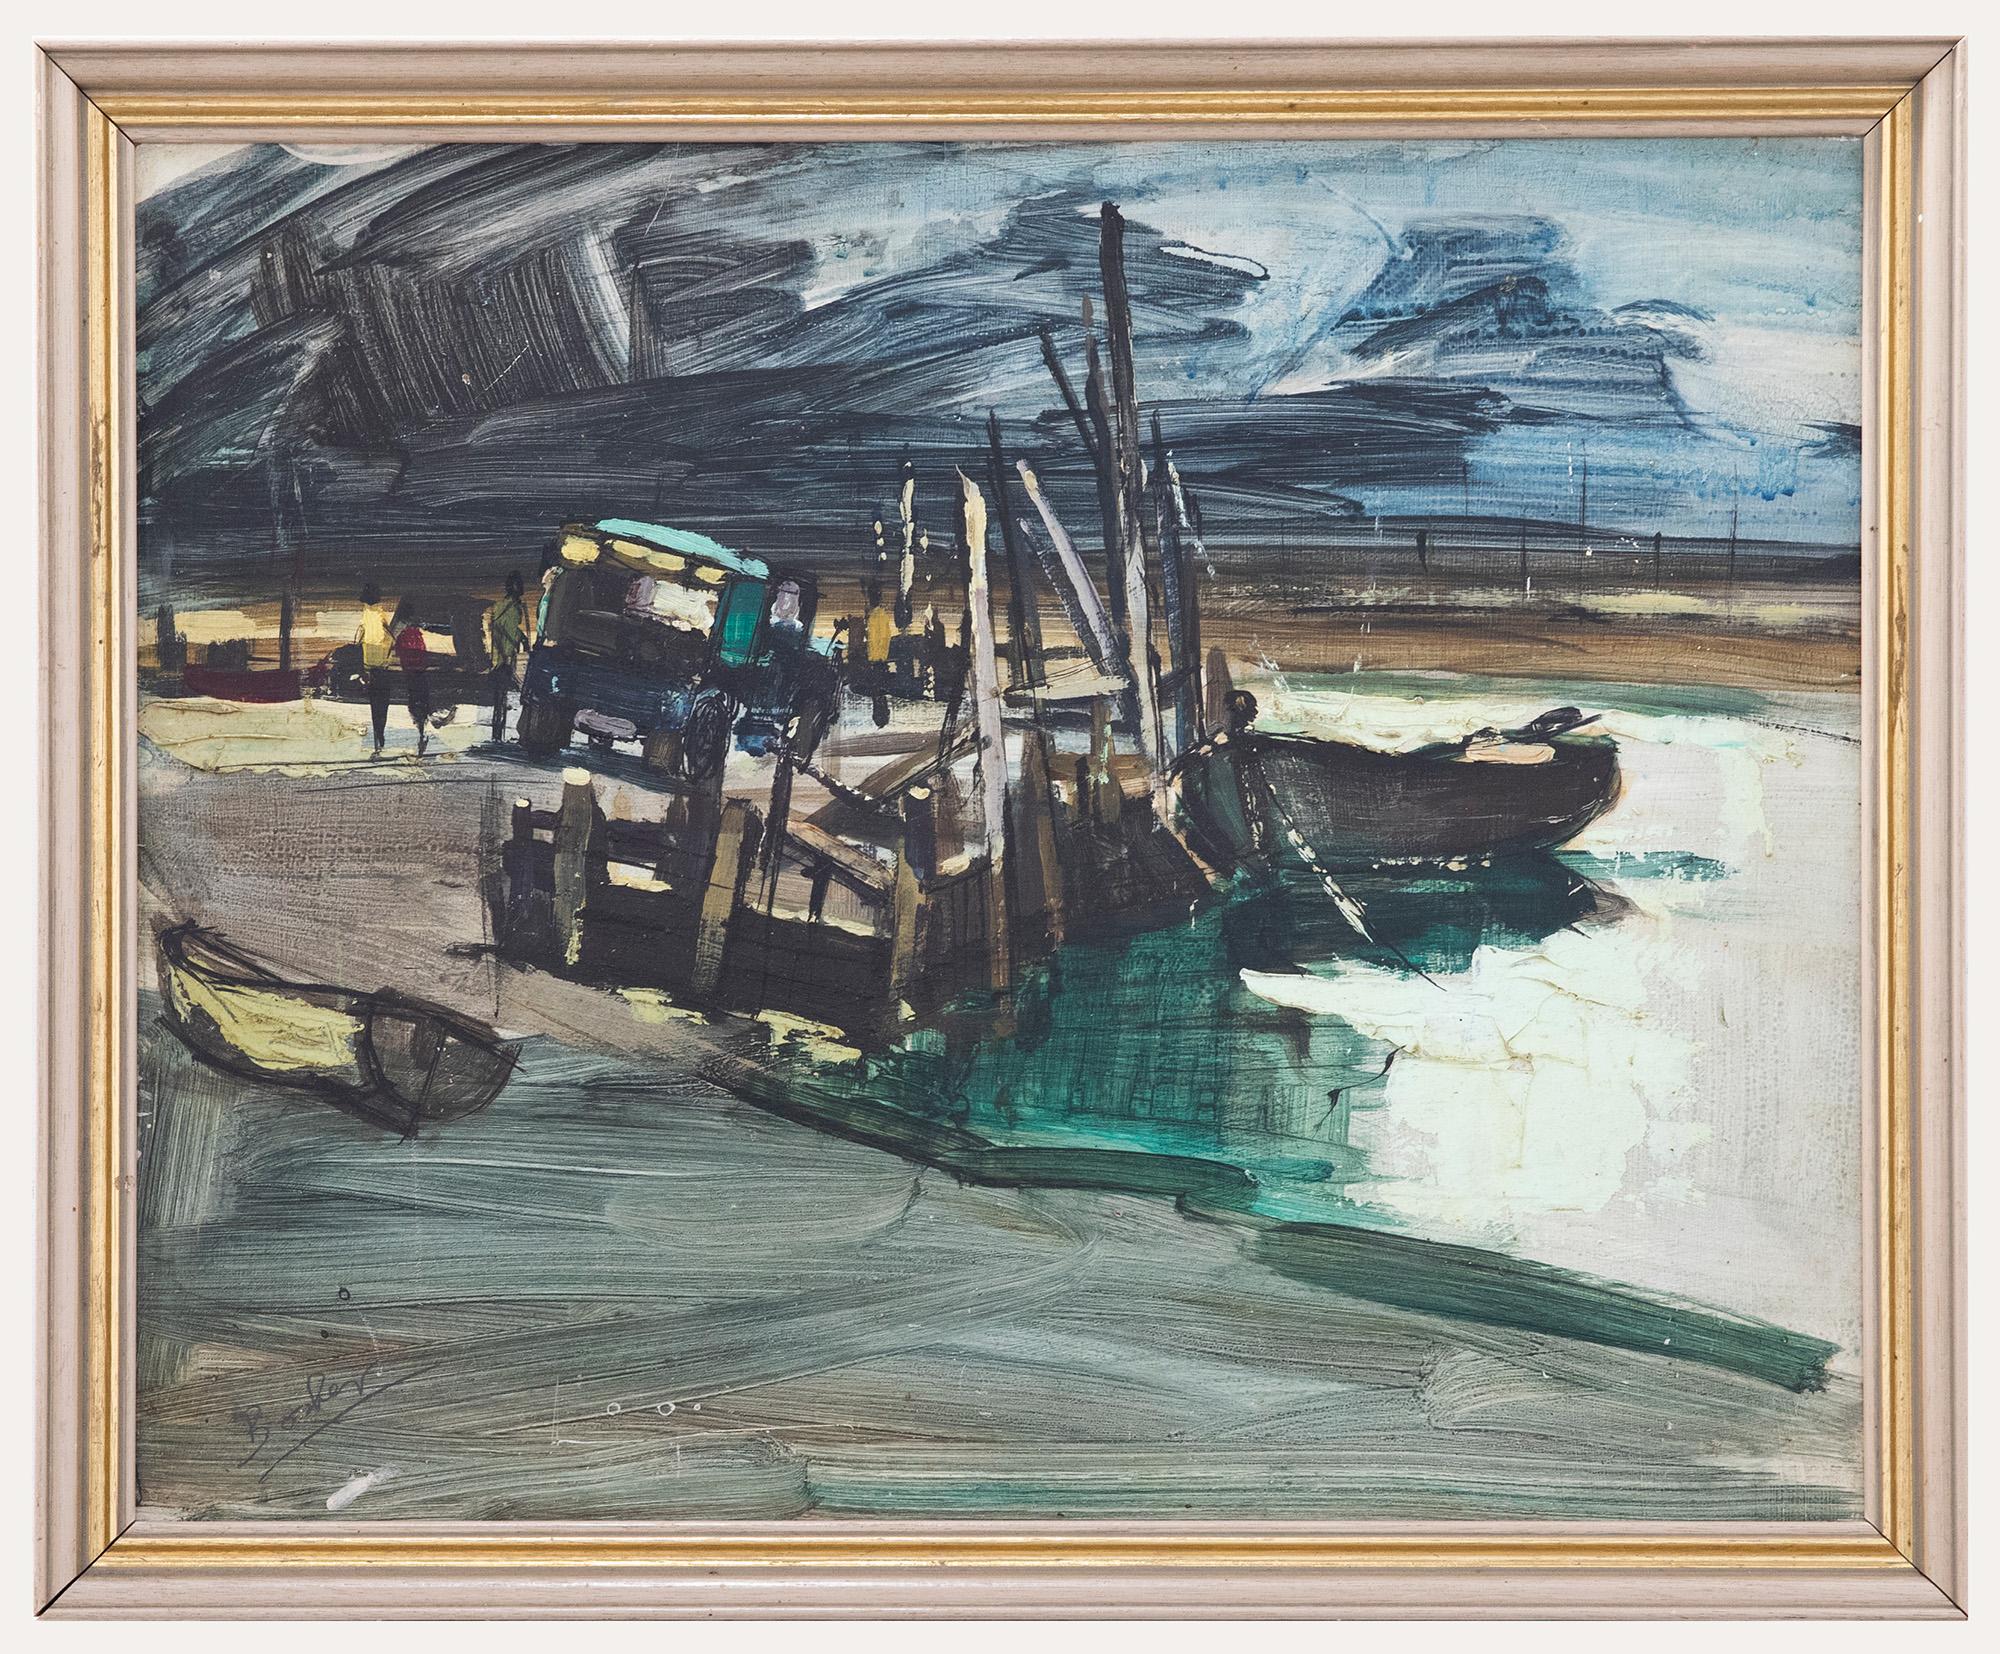 Unknown Abstract Painting - Donald Bosher (1912-1977) - Mid 20th Century Oil, Estuary Scene with Moored Boat